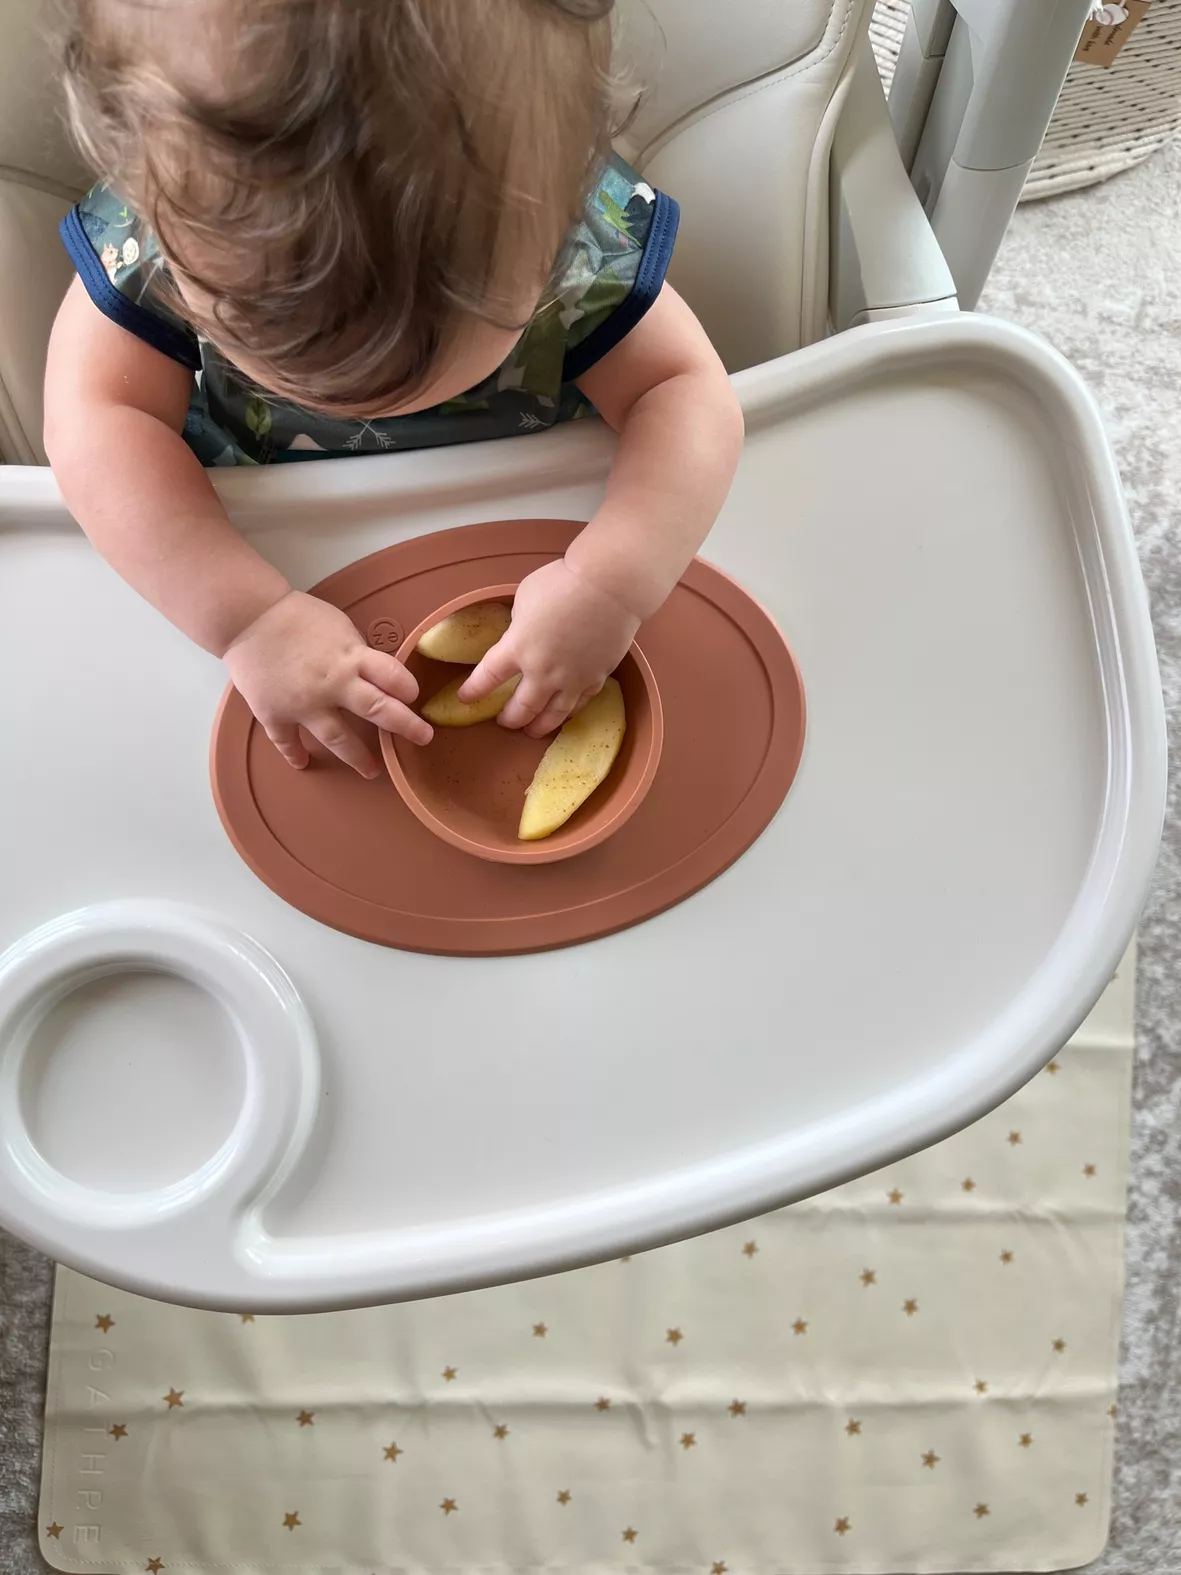 The Tiny Cup by ezpz / Open-Top, Silicone Drinking Cup for Babies